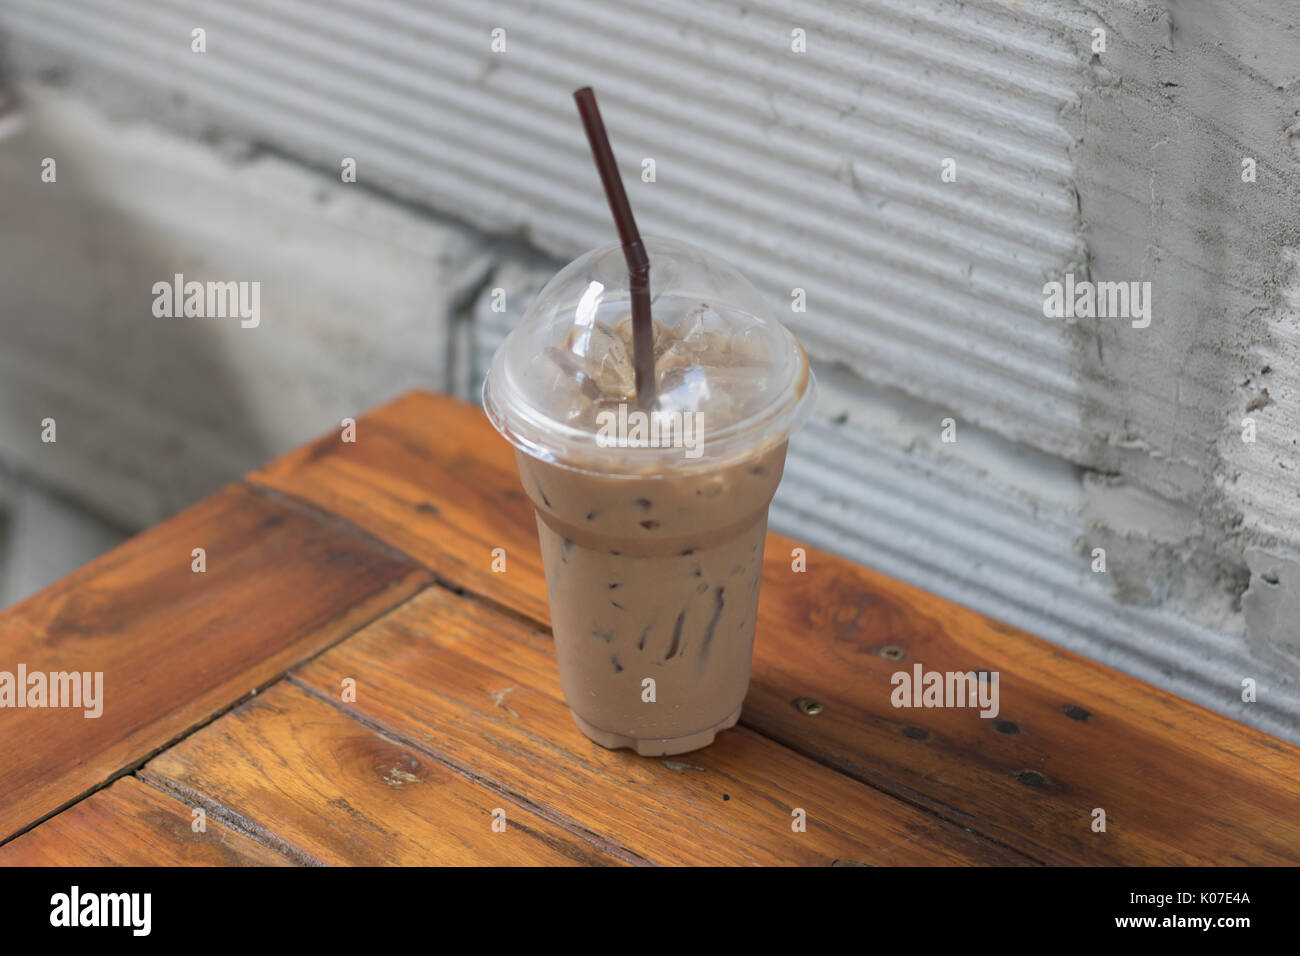 https://c8.alamy.com/comp/K07E4A/iced-coffee-in-take-away-cup-plastic-glass-on-the-wood-table-in-cafe-K07E4A.jpg